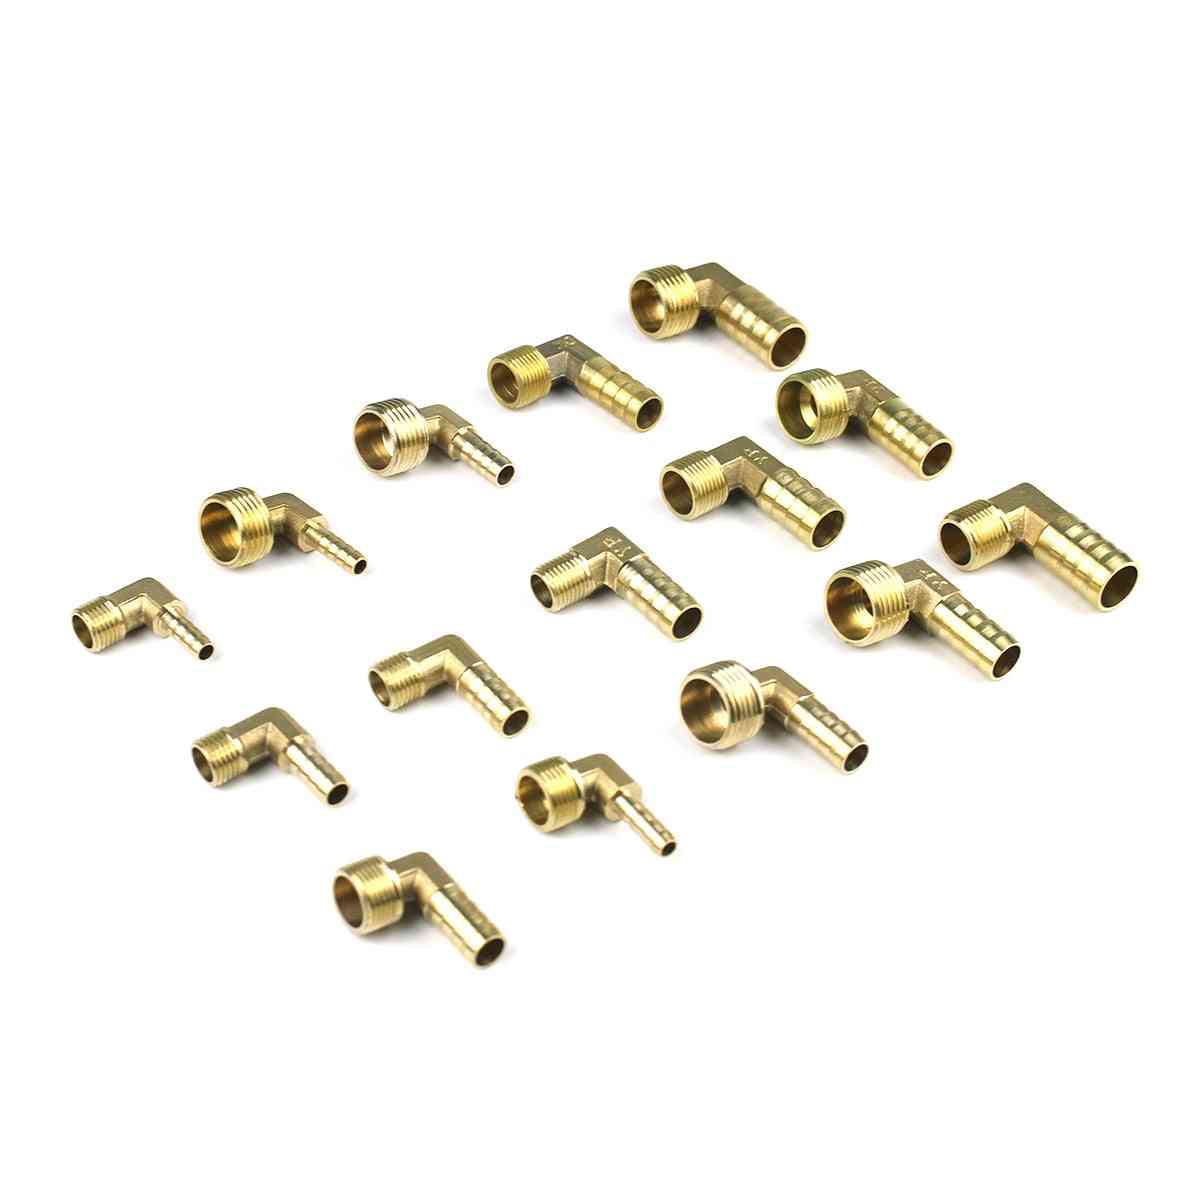 Brass Hose Barb Fitting Elbow, Thread Pipe Barbed Coupler Connector Joint Adapter